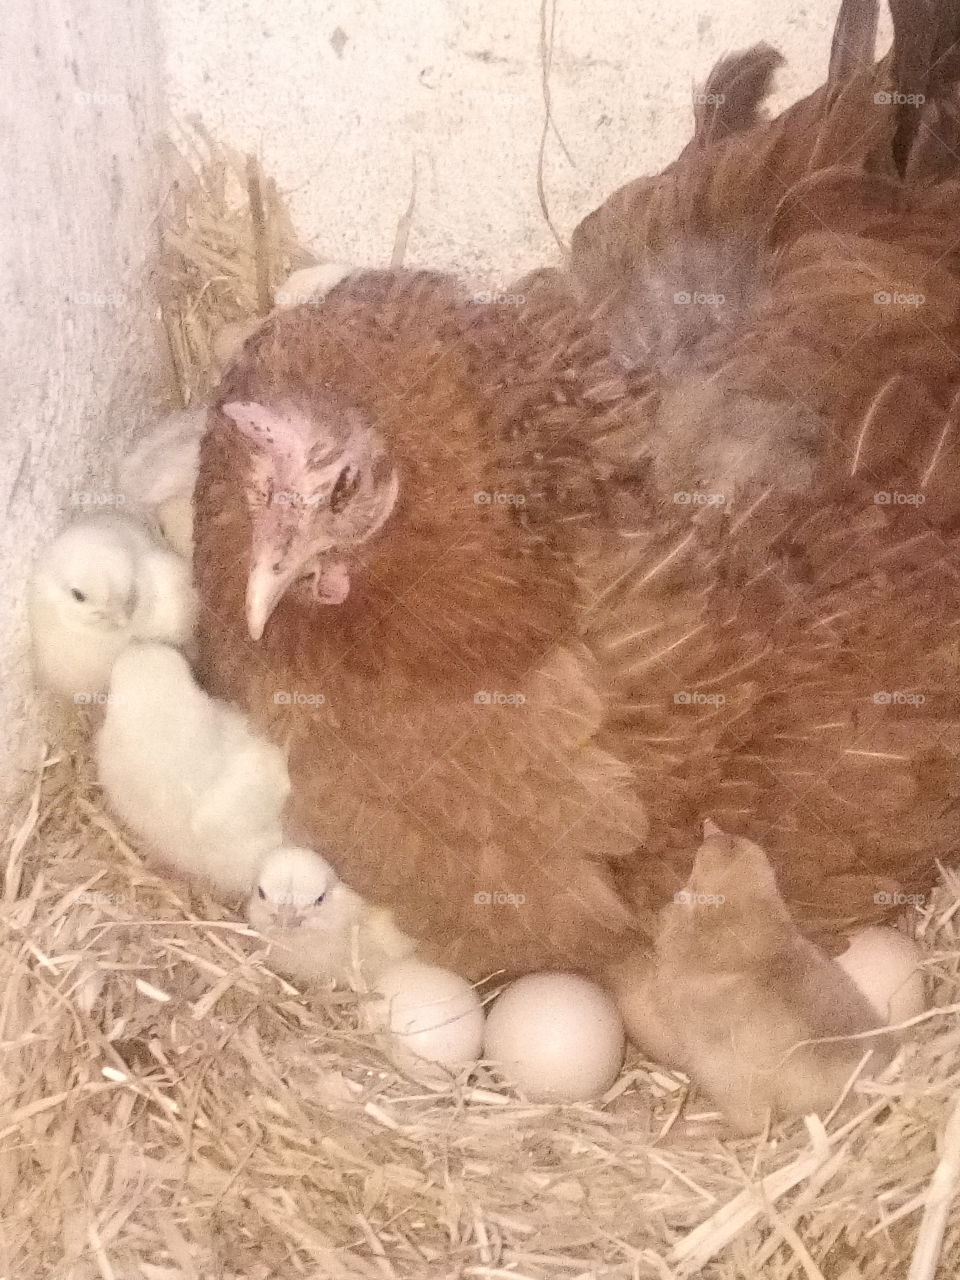 Finally the eggs hatch and the chicks come out